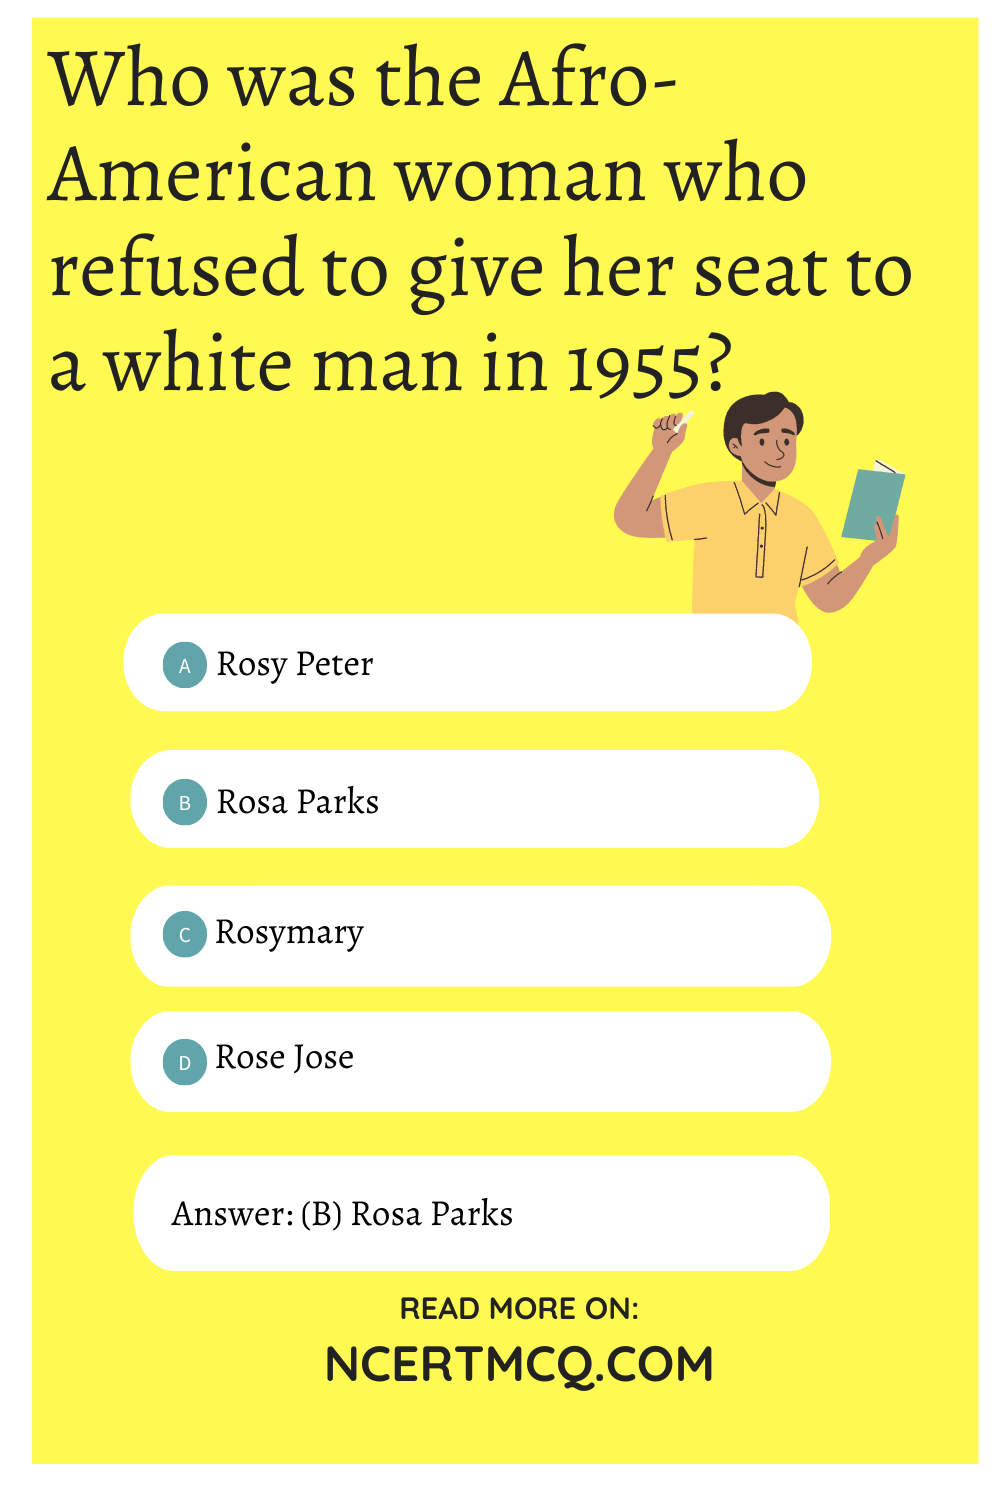 Who was the Afro-American woman who refused to give her seat to a white man in 1955?